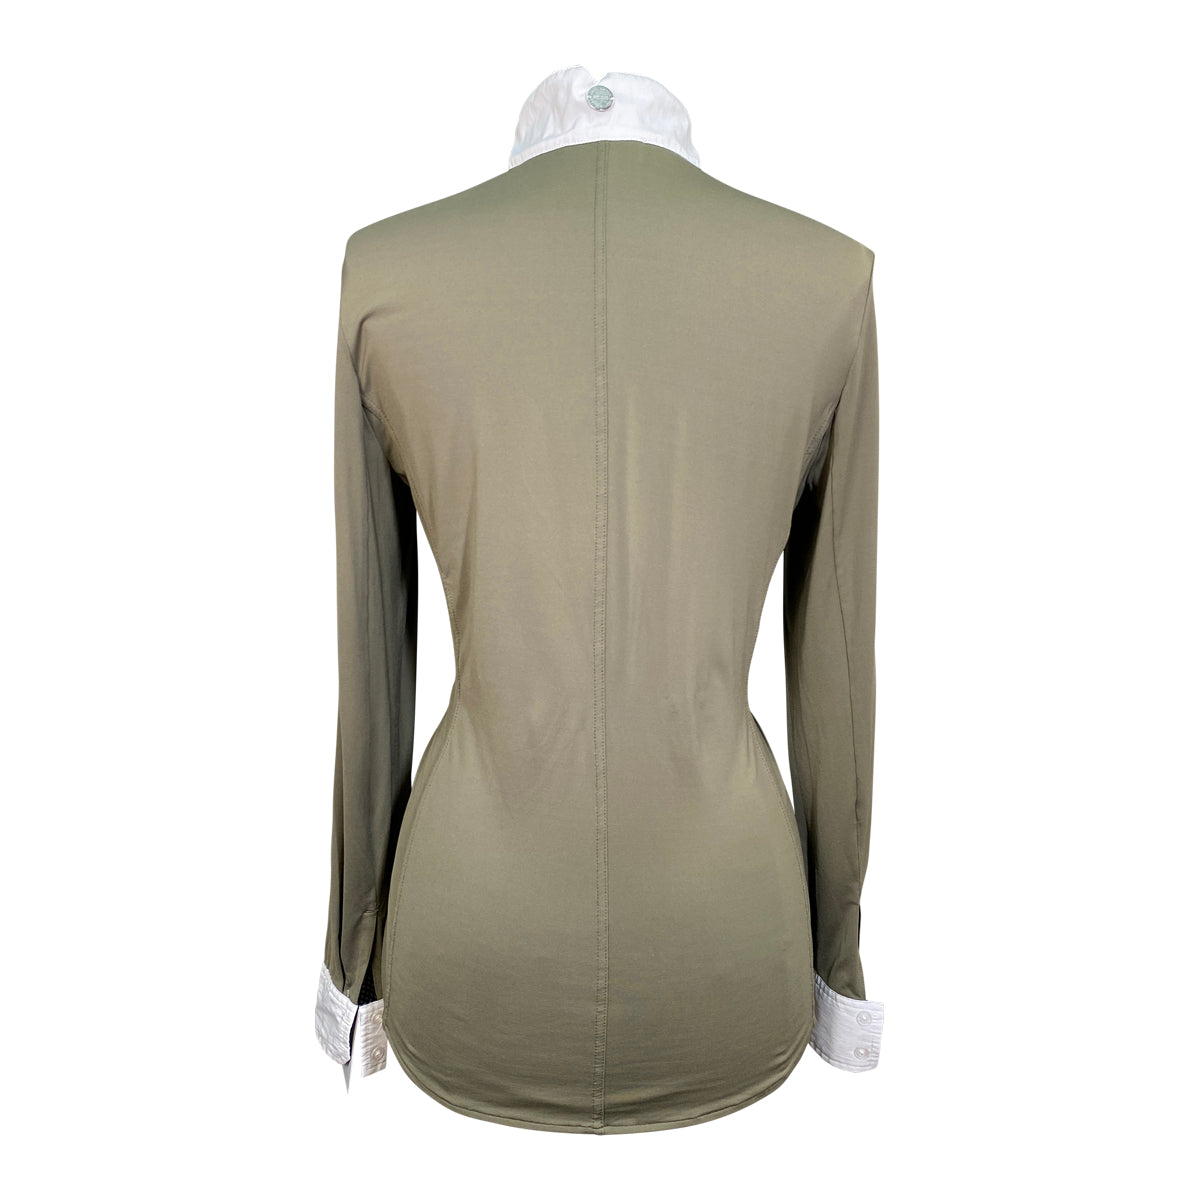 Asmar Equestrian 'Costa' Cooling Show Shirt in White/Army Green